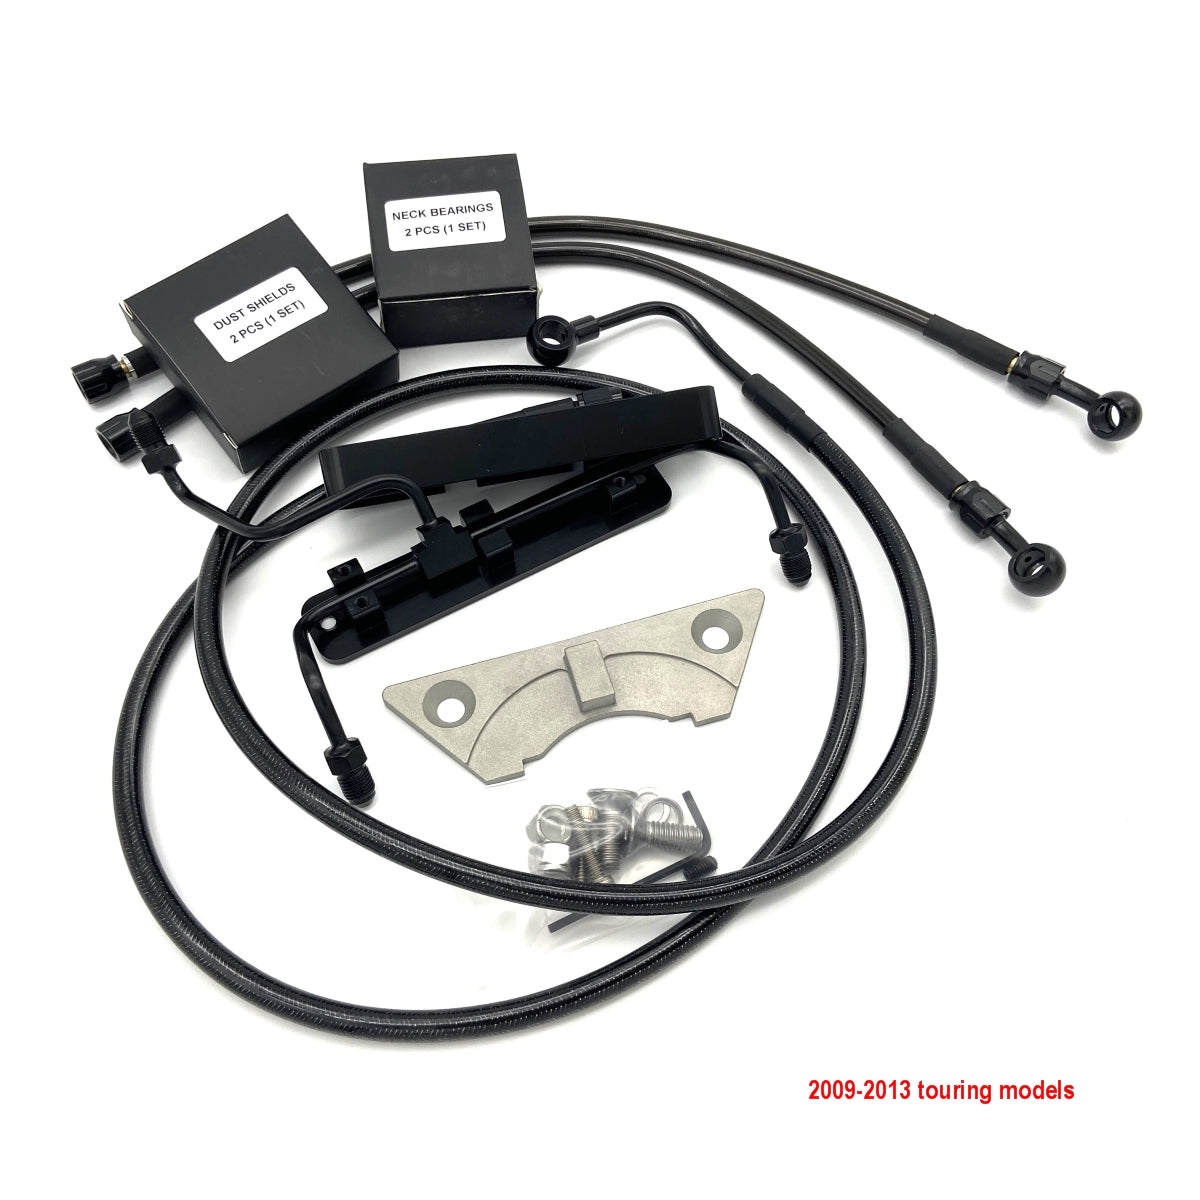 ABS variable Brake Line Kit Harley touring with increased ride height